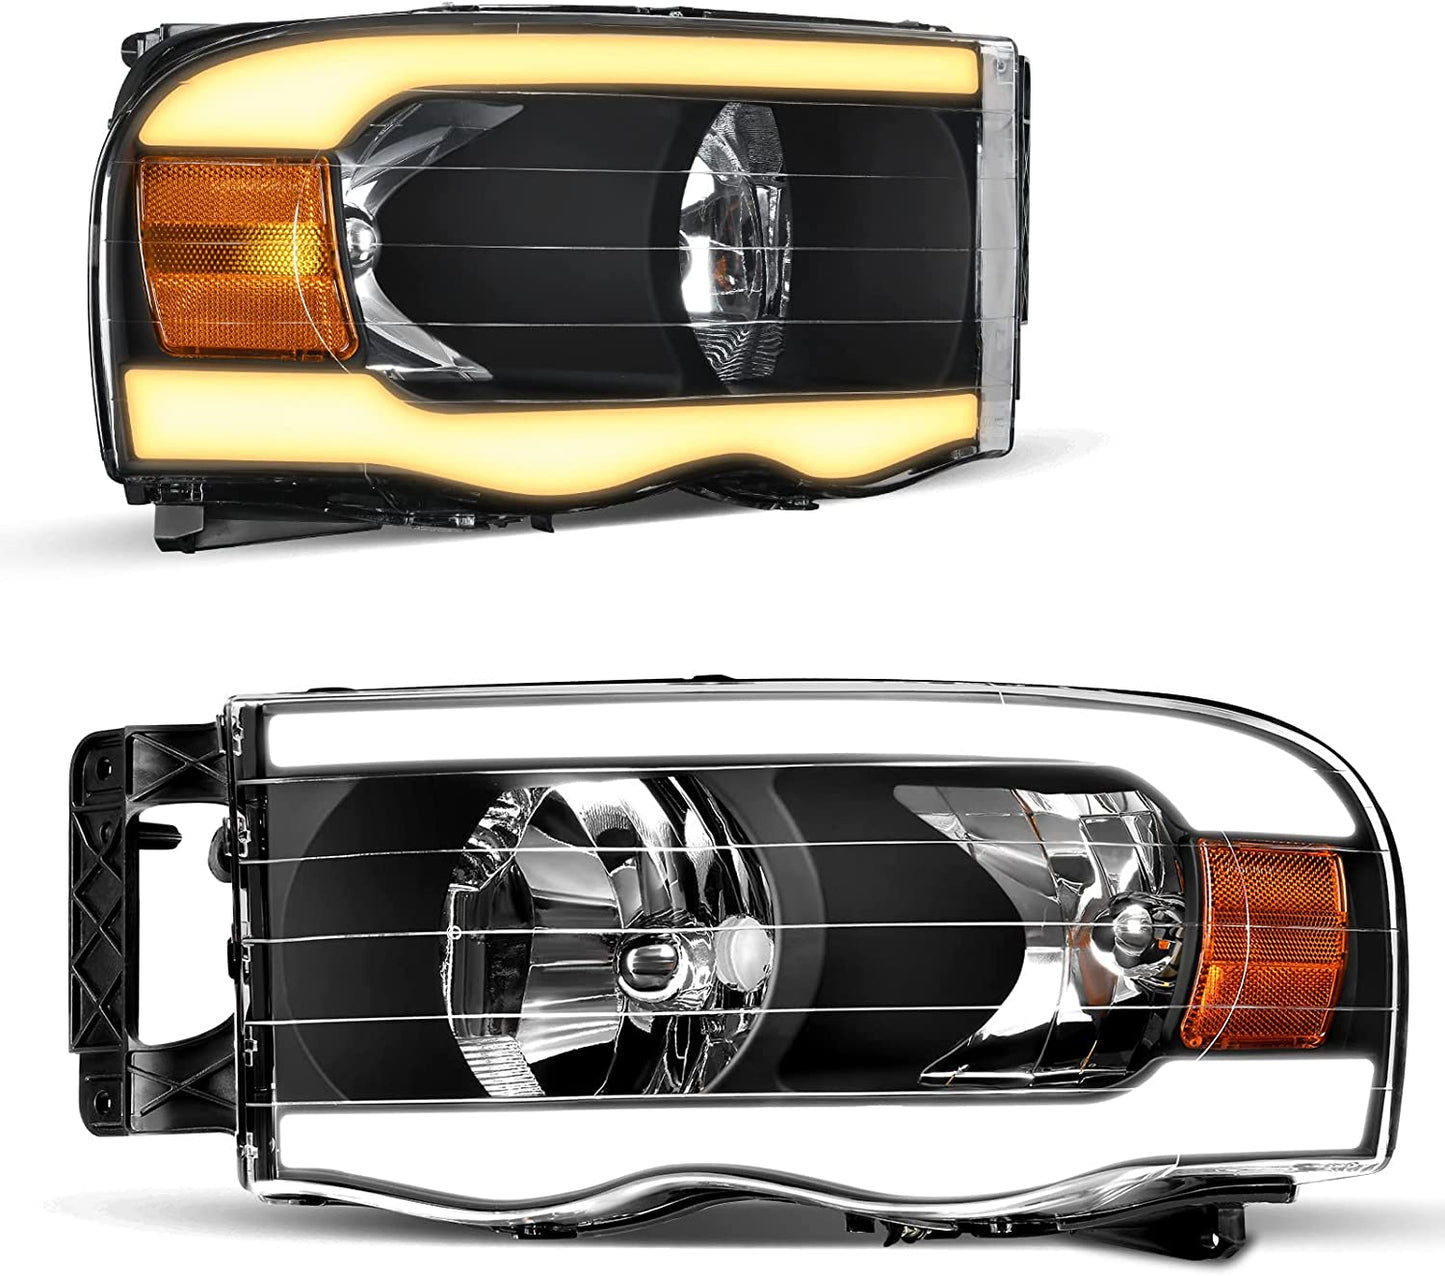 Headlights Assembly for 2002-2005 Dodge Ram Pickup Headlight Replacement Driving Light Chrome Housing Red Reflector Clear Lens